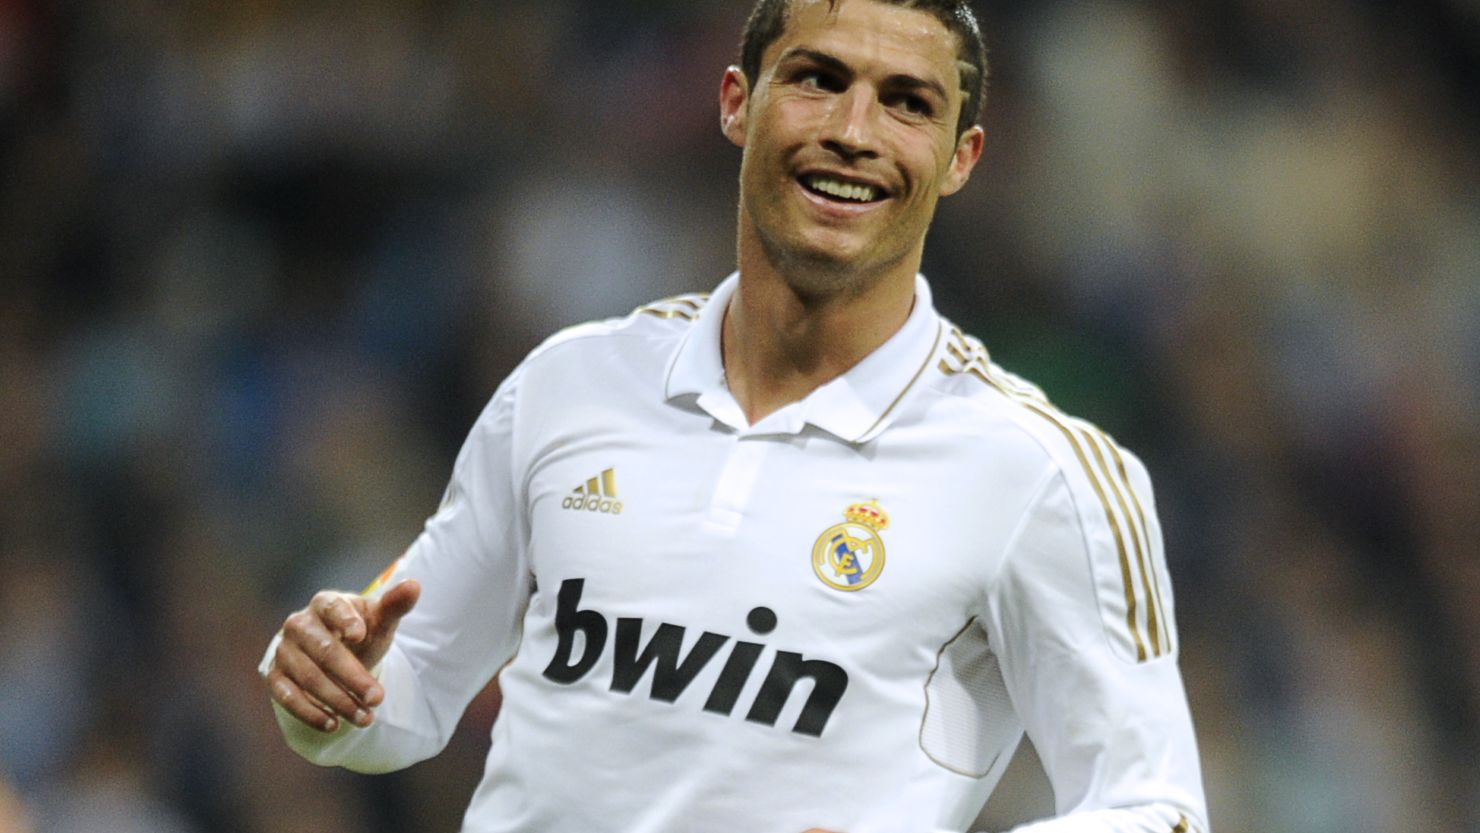 Cristiano Ronaldo is all smiles after scoring twice in Real's 5-1 beating of Real Sociedad.